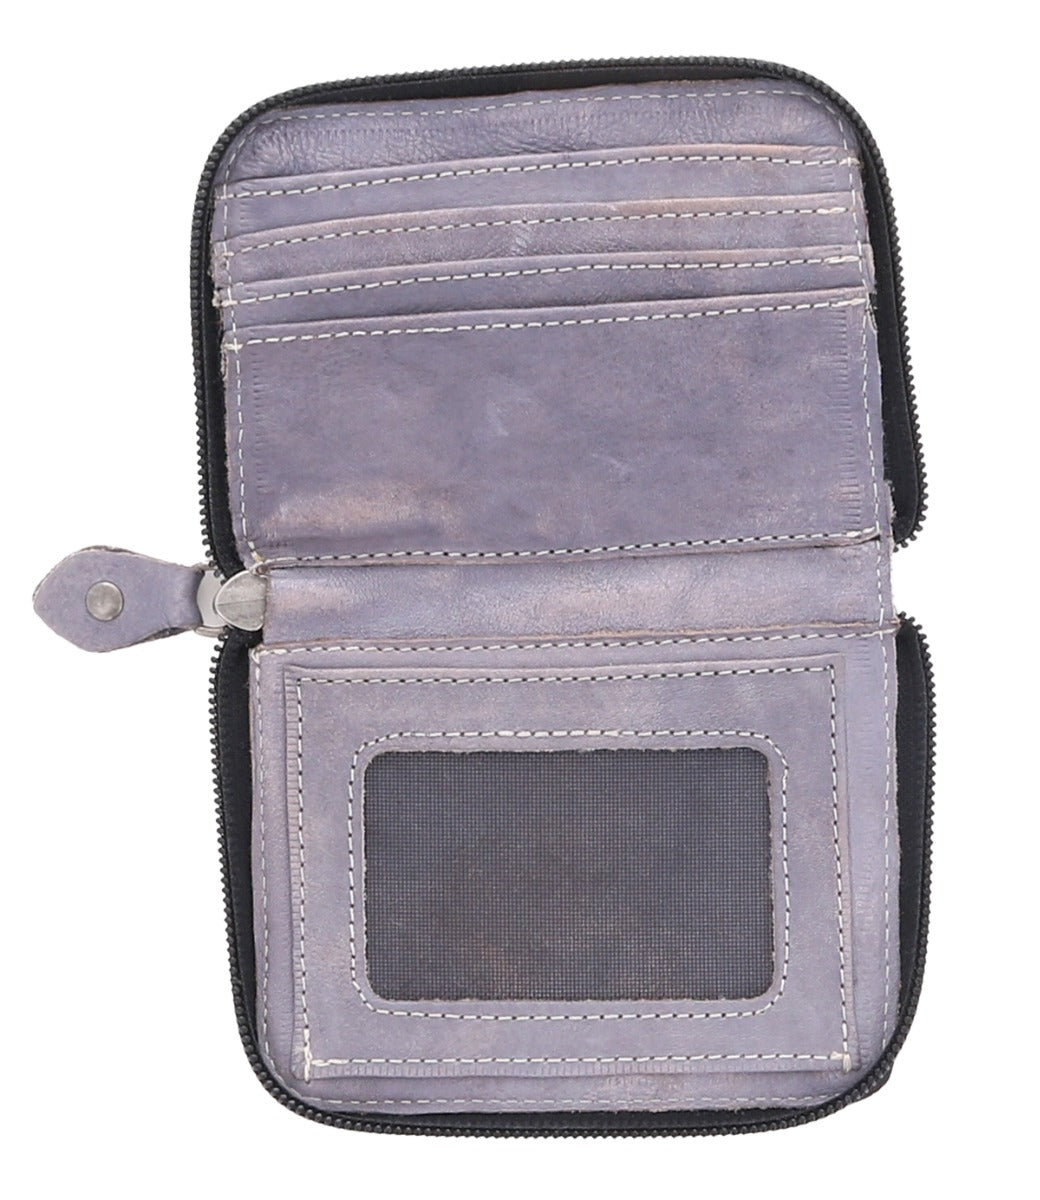 A Bed Stu Ozzie purple leather wallet on a white background.